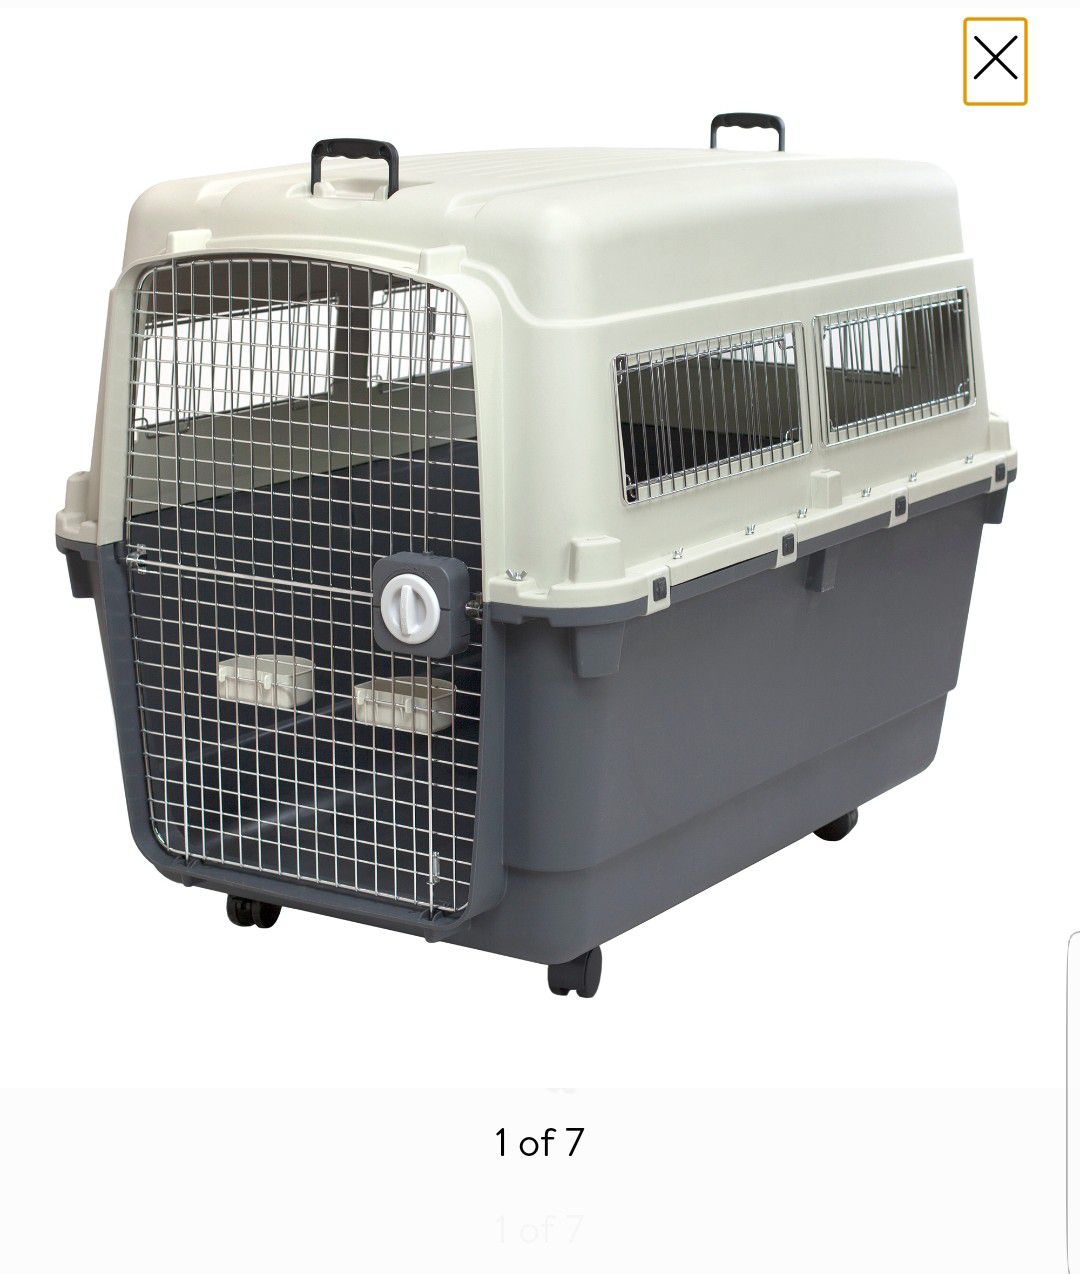 Kennels Direct Premium Plastic Dog Kennel and Travel Crate